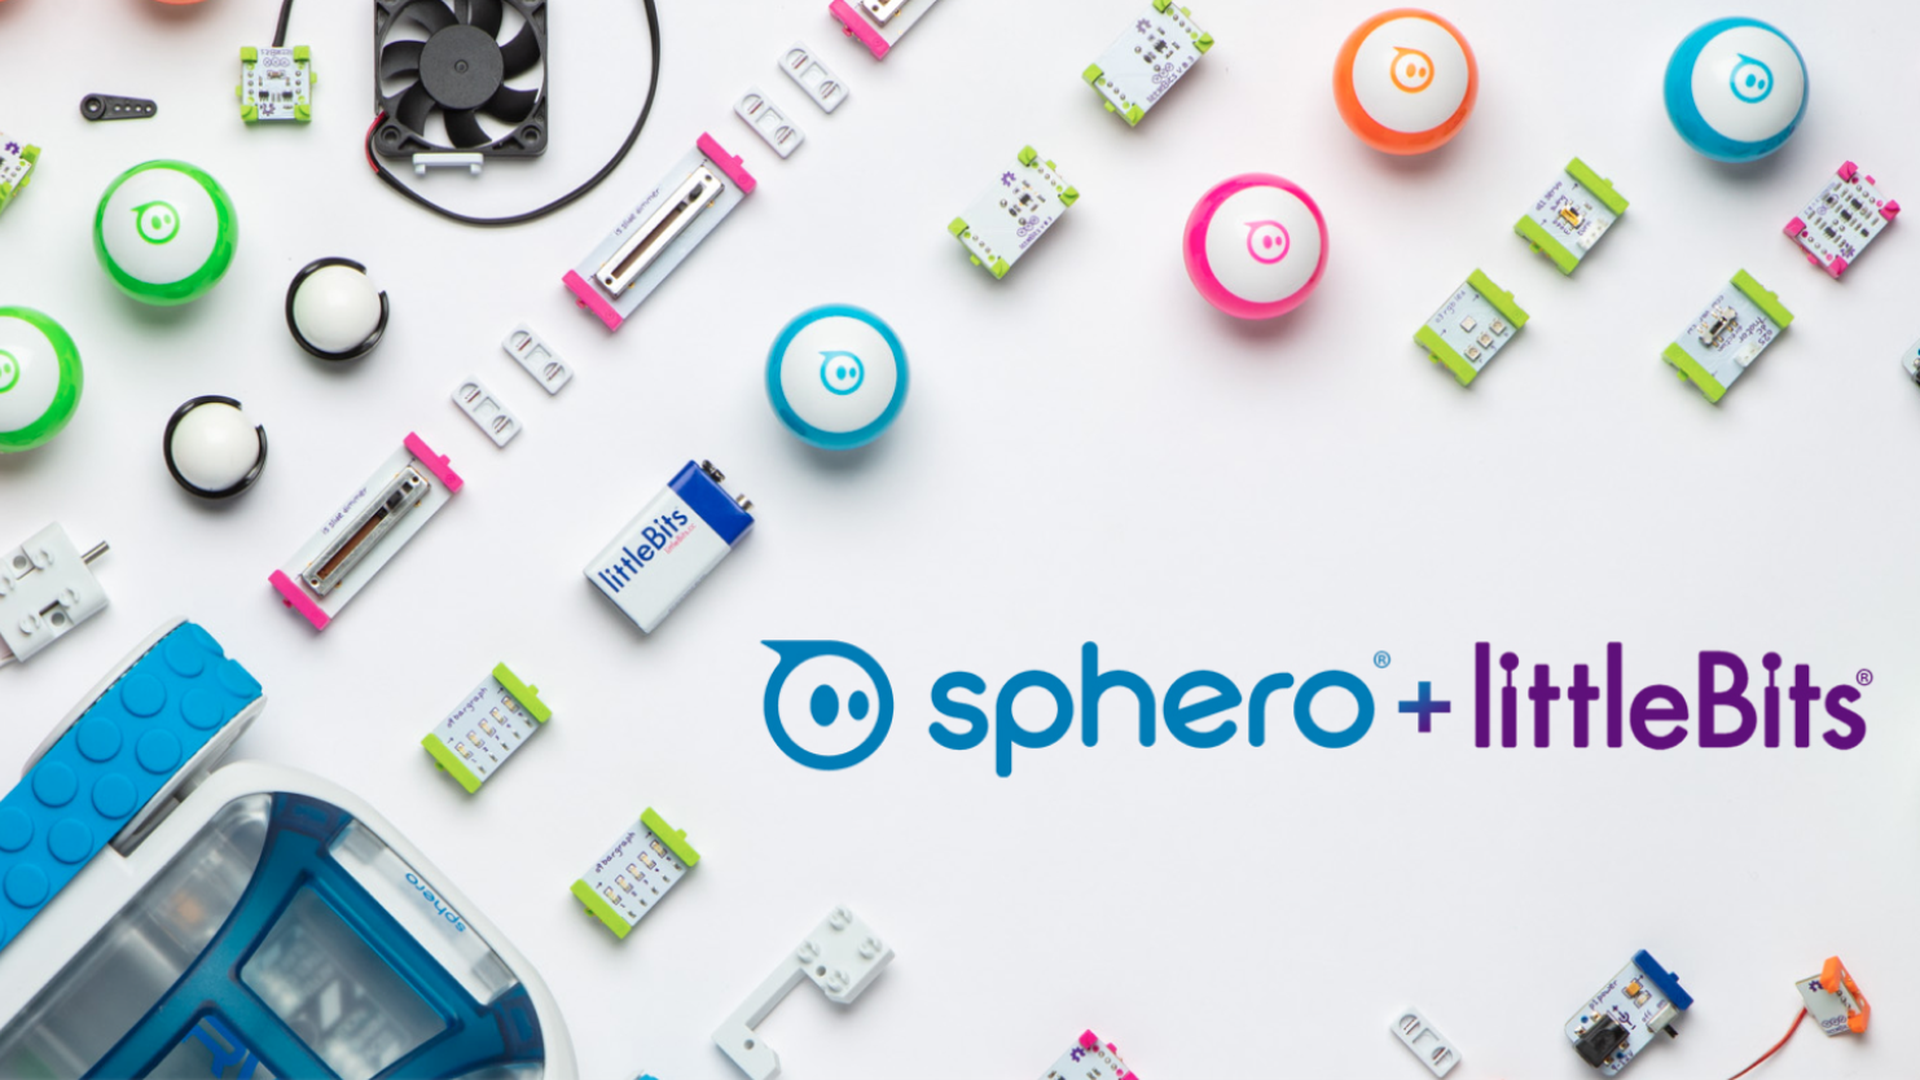 A combination of products from Sphero and LittleBits